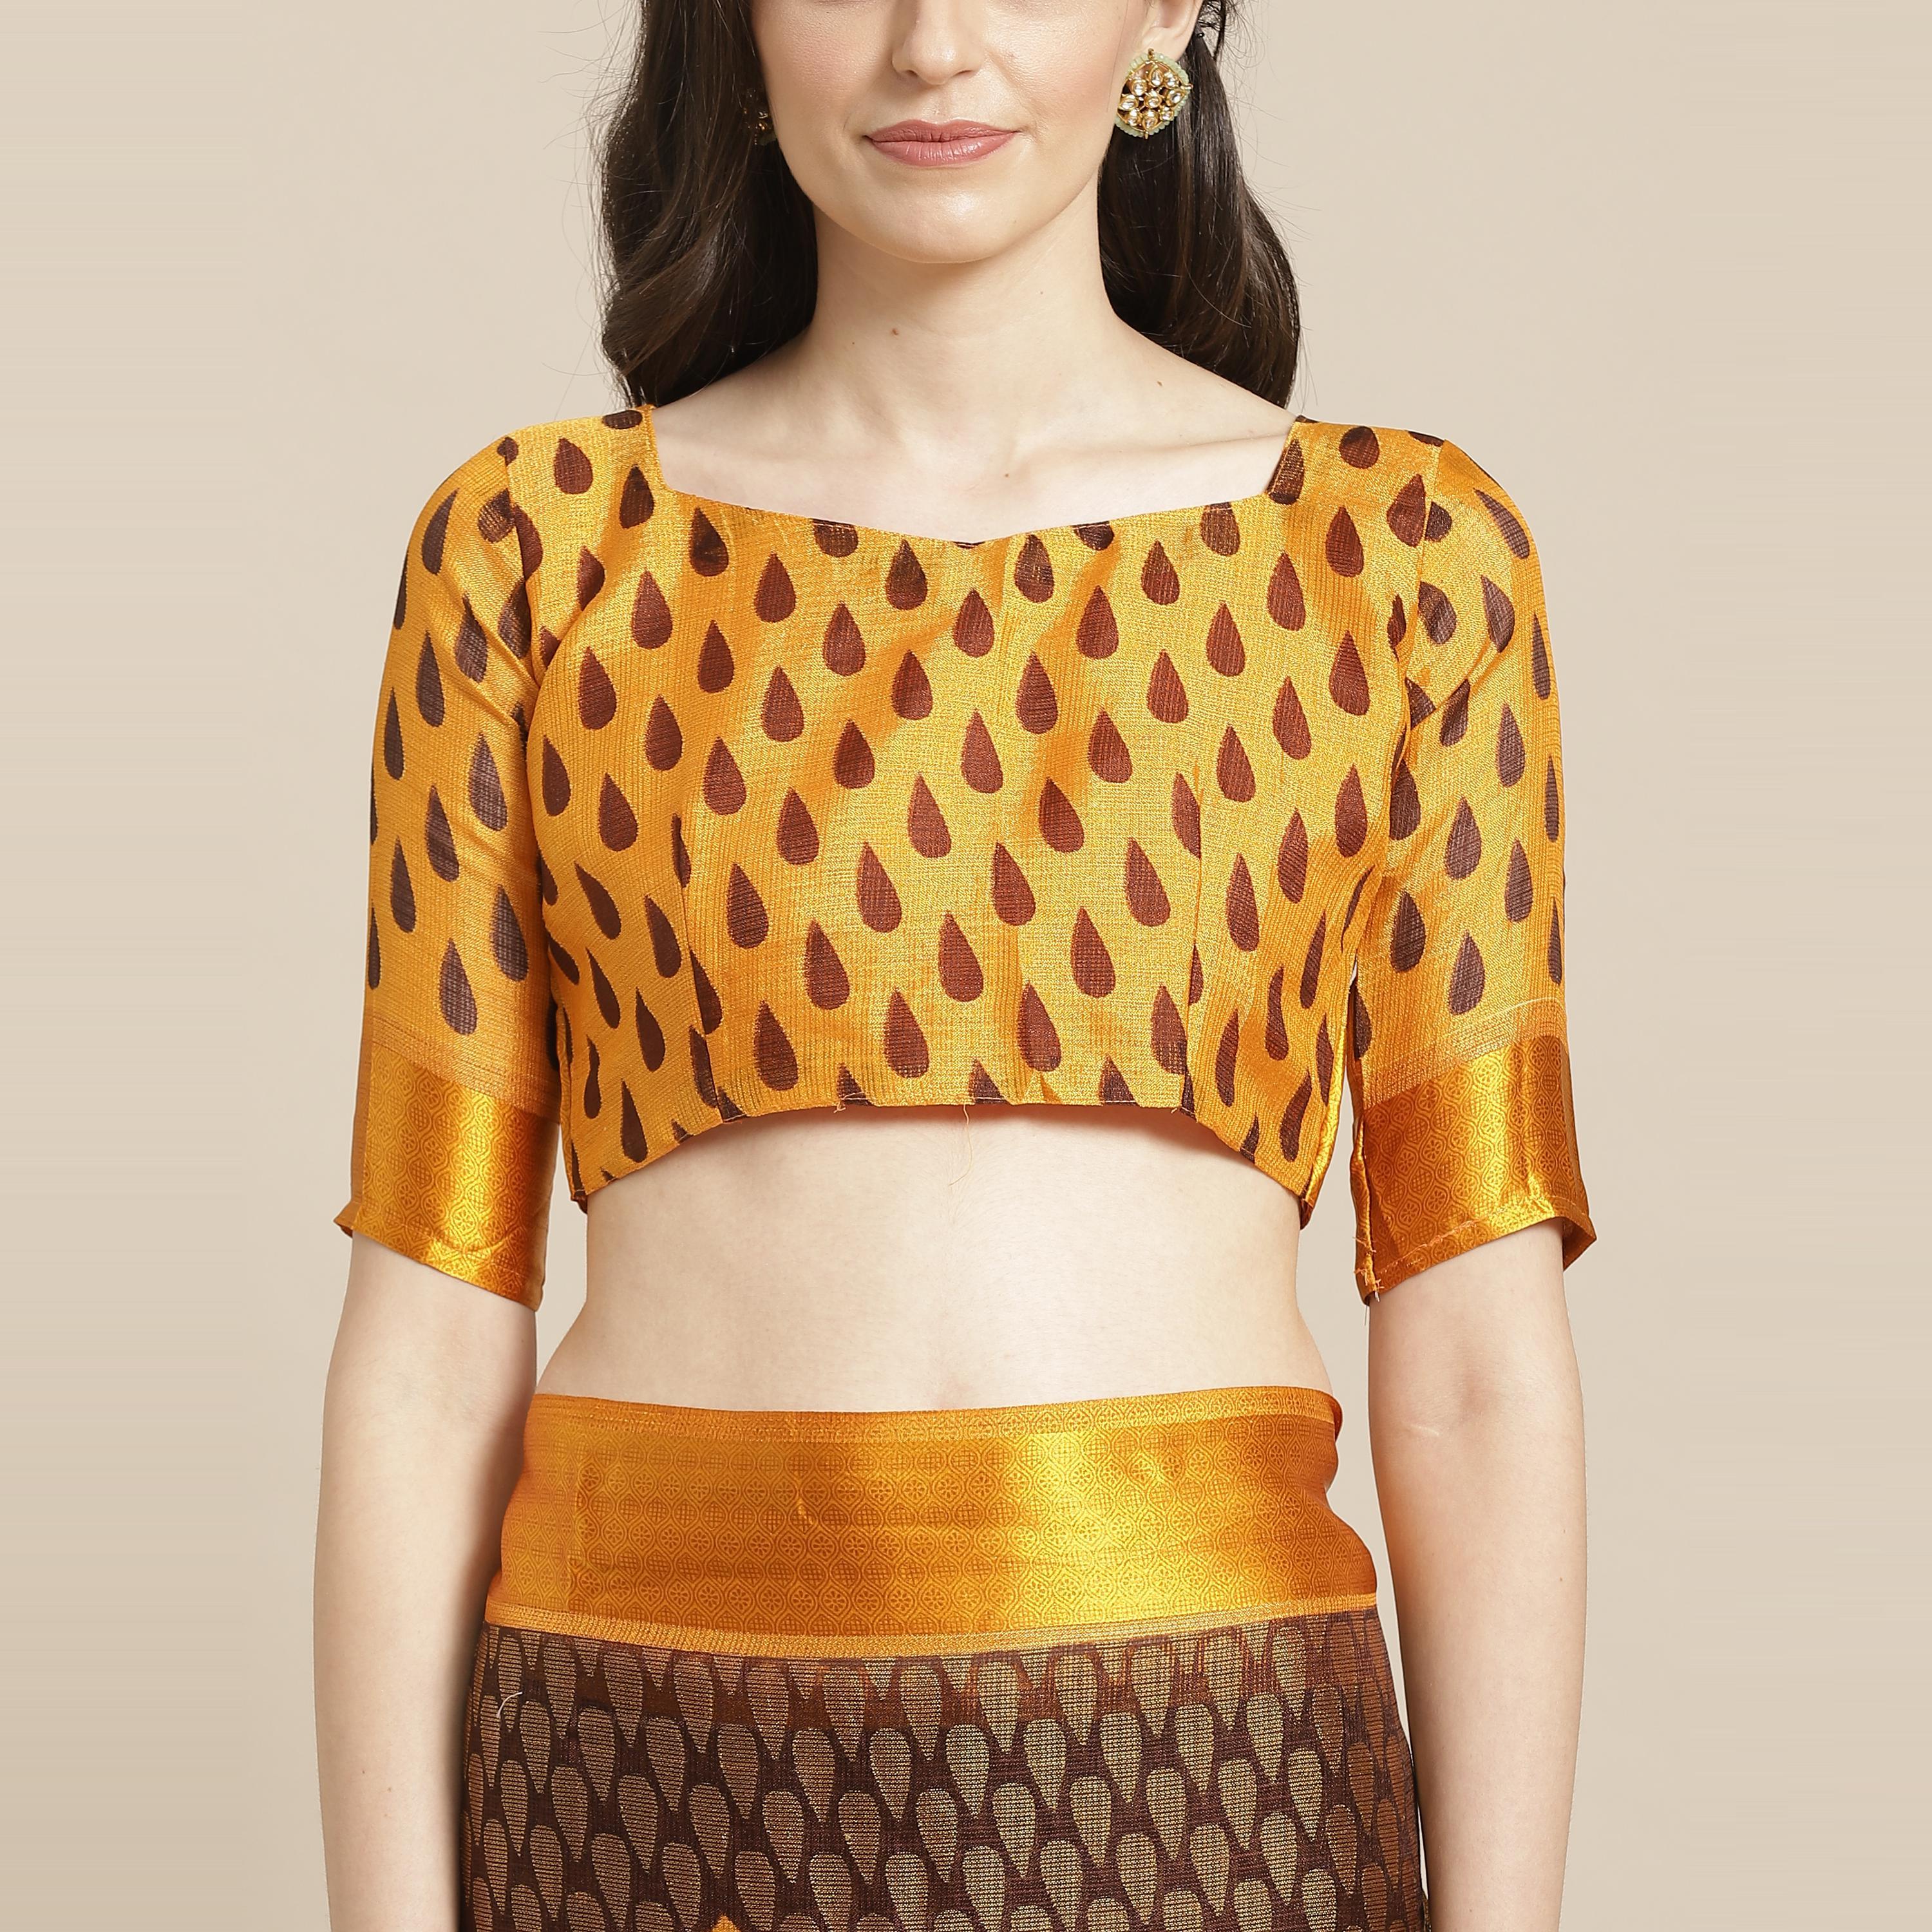 Brown Casual Brasso Printed Saree With Unstitched Blouse - Peachmode